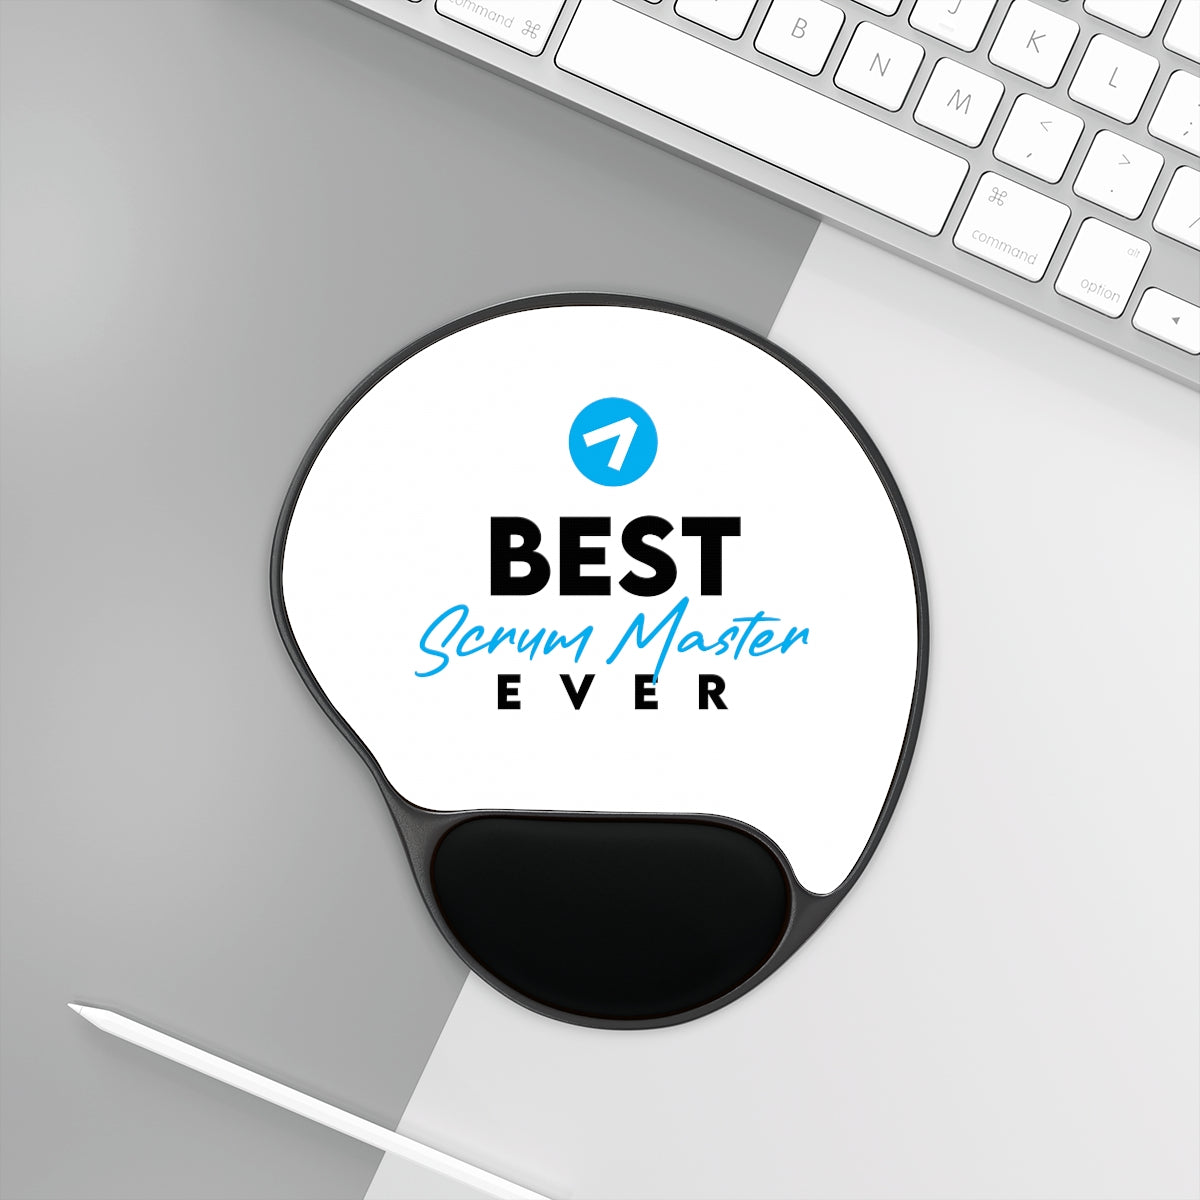 Best Scrum Master - Light Blue - Mouse Pad With Wrist Rest